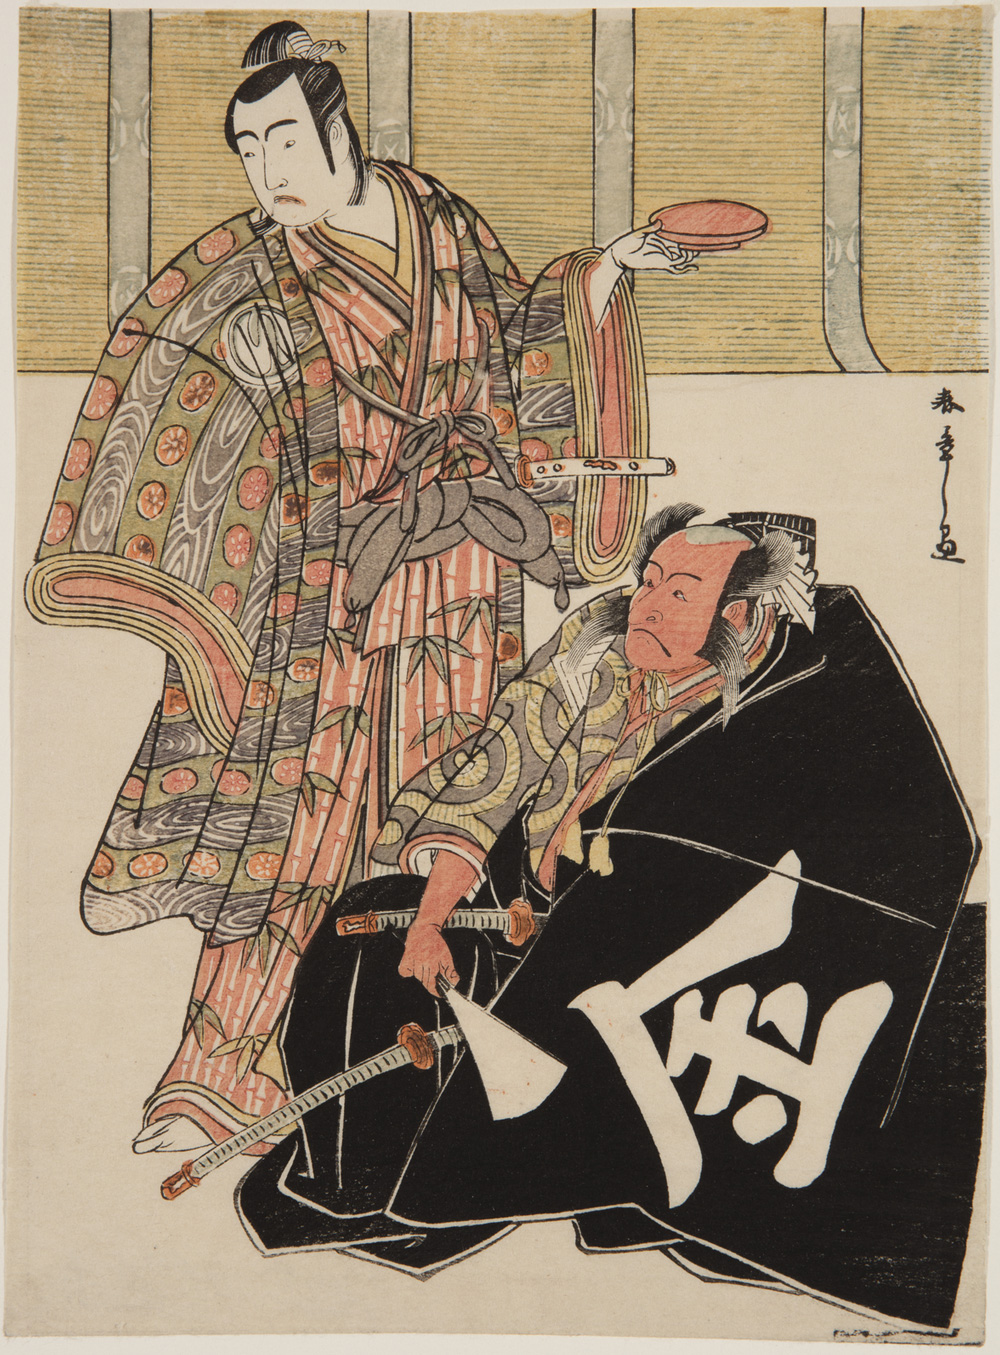 A Japanese print of two actors dressed in traditional robes. One is seated and is draped in a black cloak, holding a fan, two swords are visible. The other stands behind him and is holding a dish.